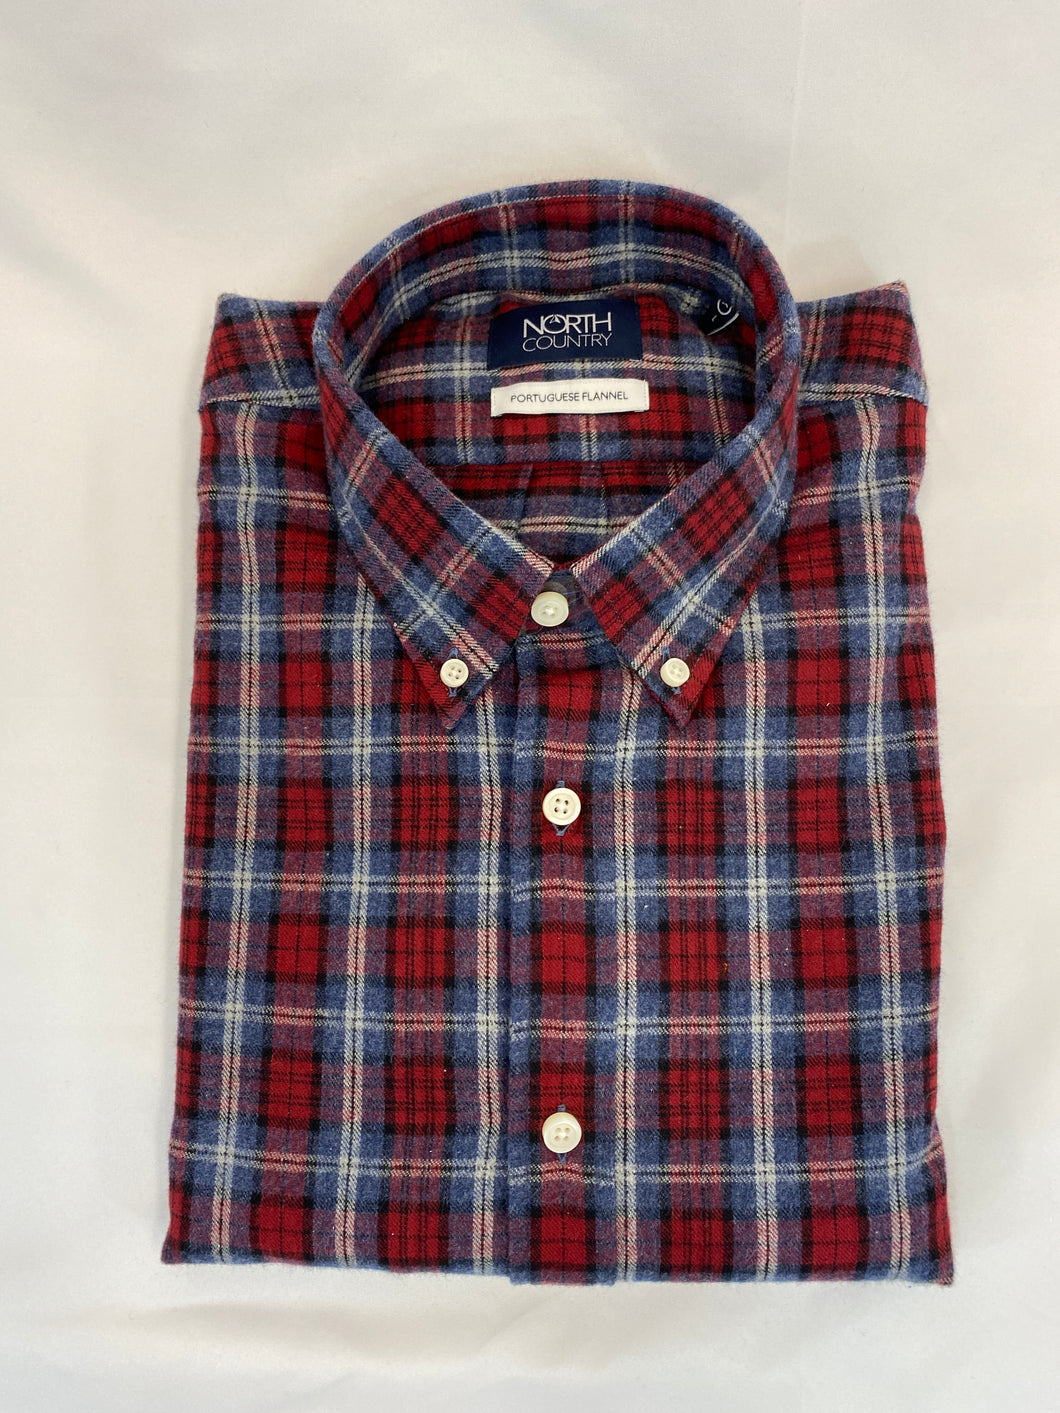 North Country Flannel Shirt BD Collar Red Grey Plaid